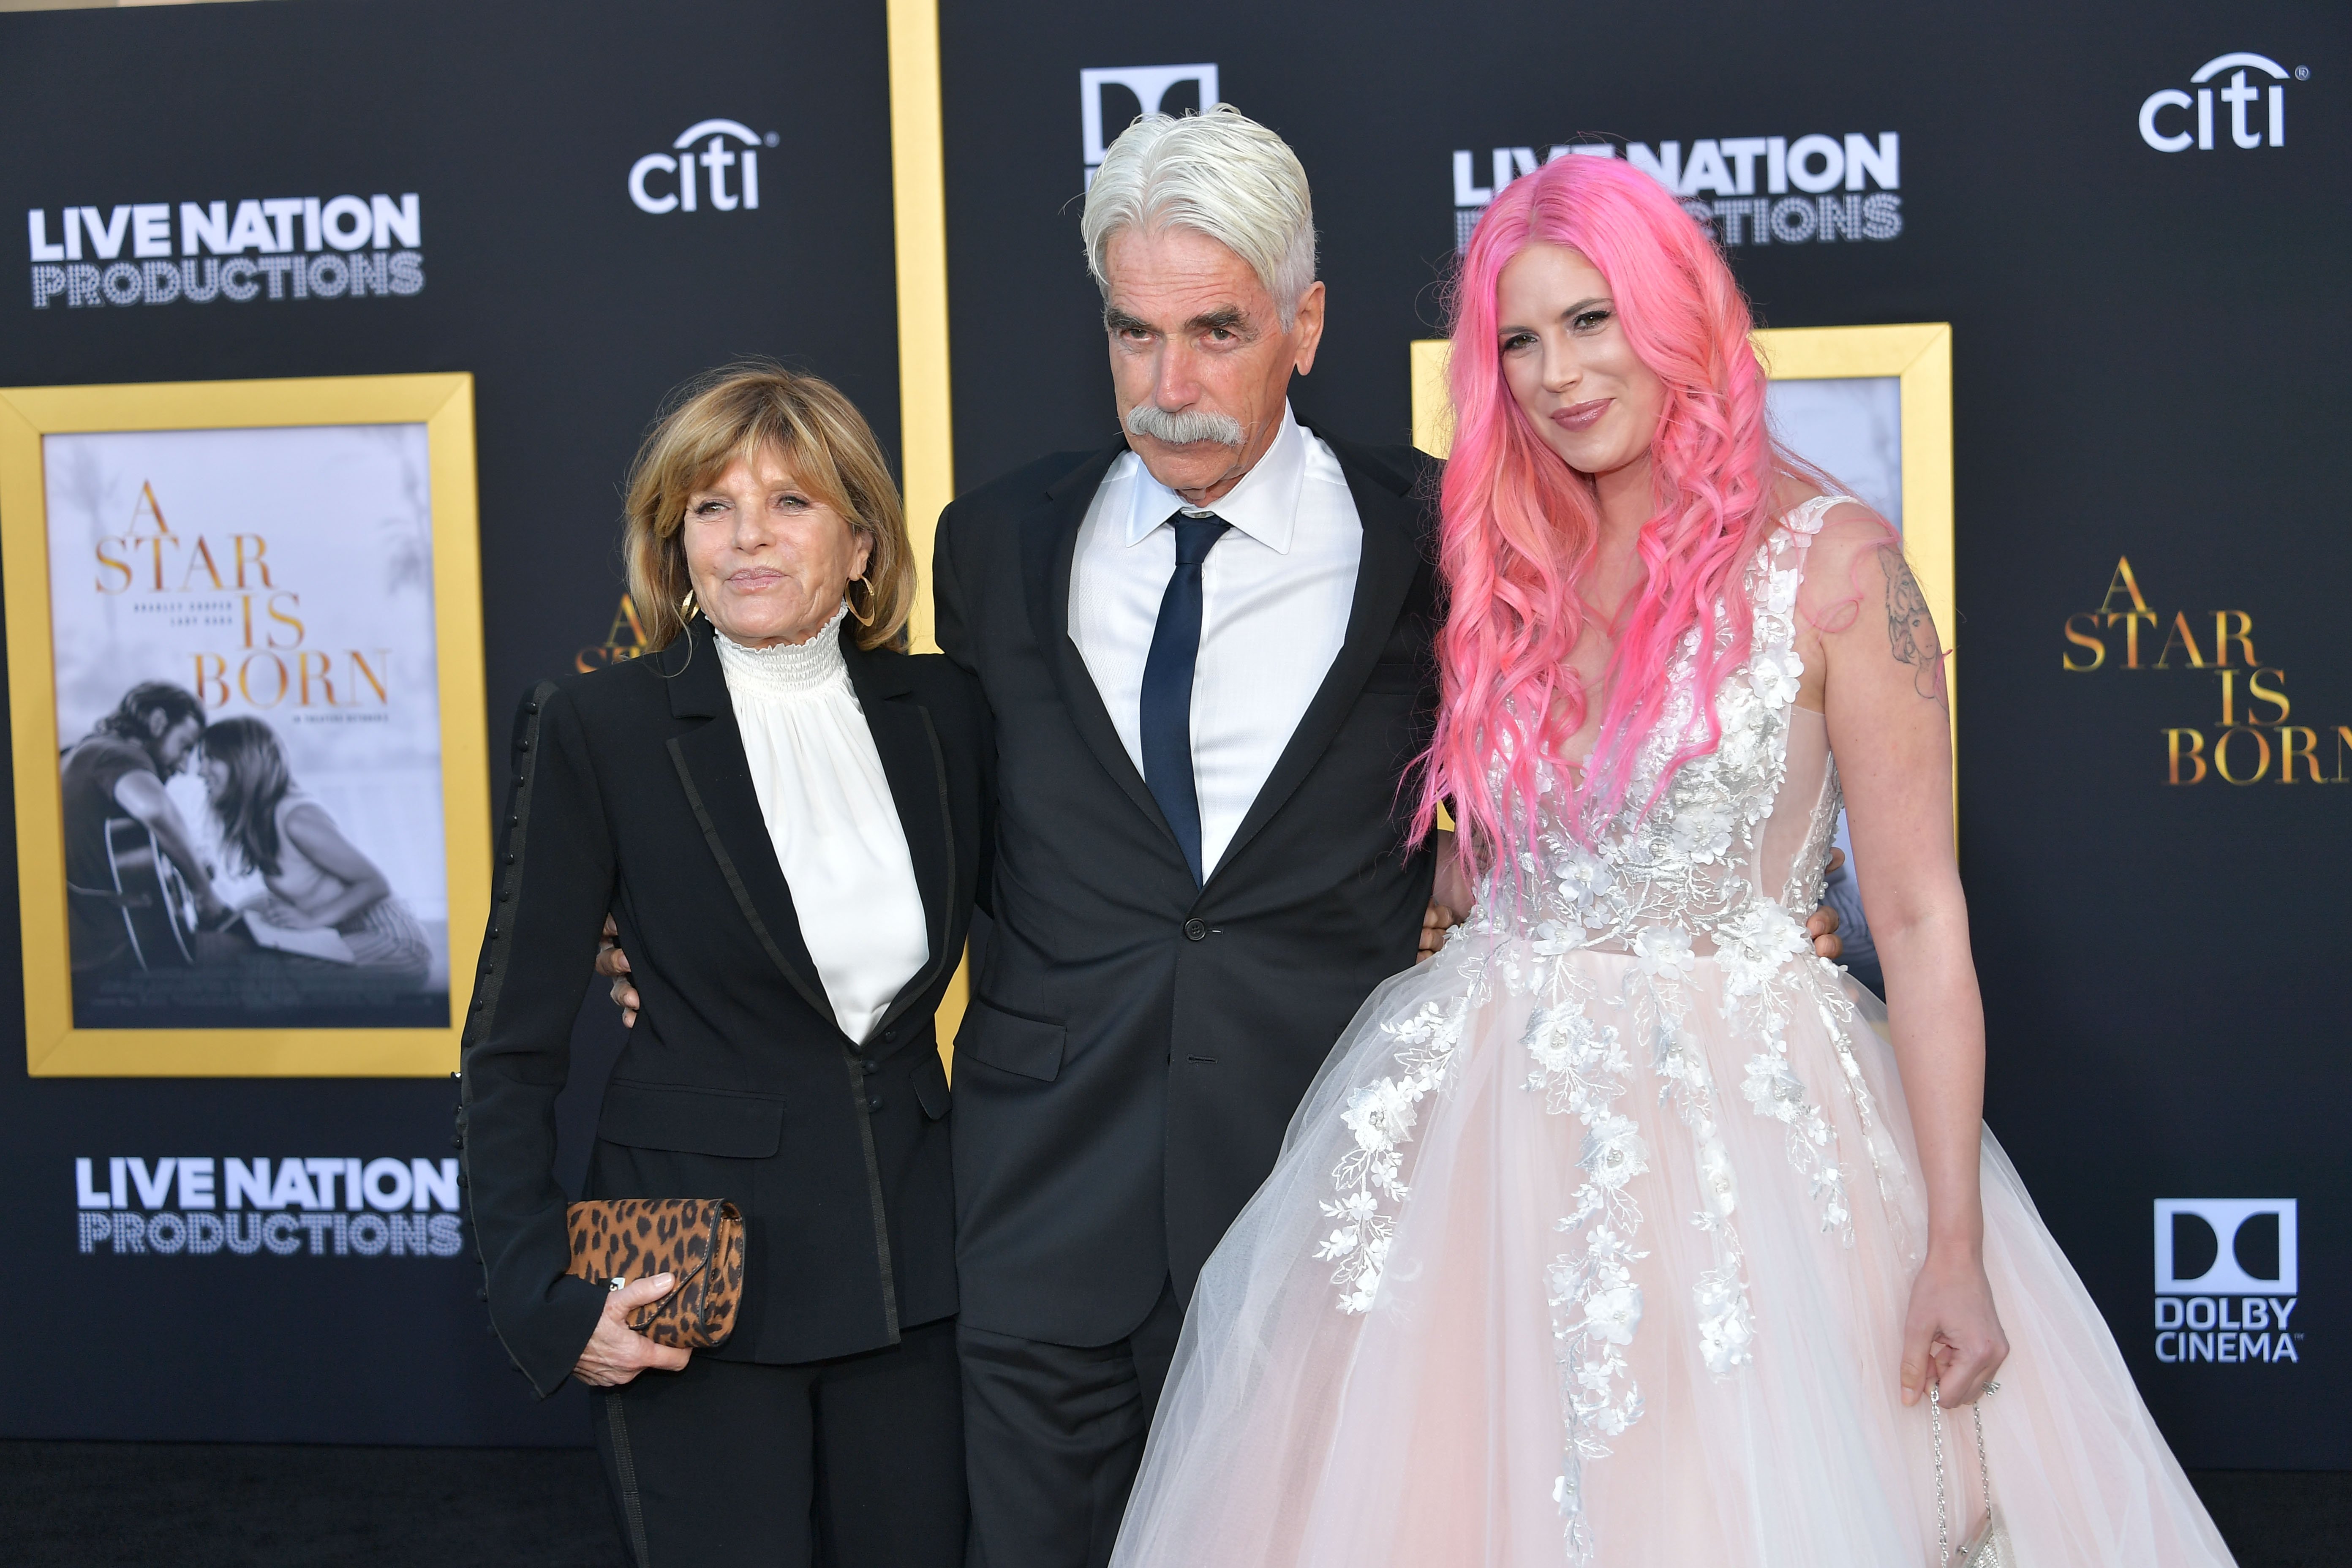 Katharine Ross, Sam Elliott and Cleo Rose Elliott arrive at the Premiere Of Warner Bros. Pictures' 'A Star Is Born' at The Shrine Auditorium on September 24, 2018 in Los Angeles, California. | Source: Getty Images